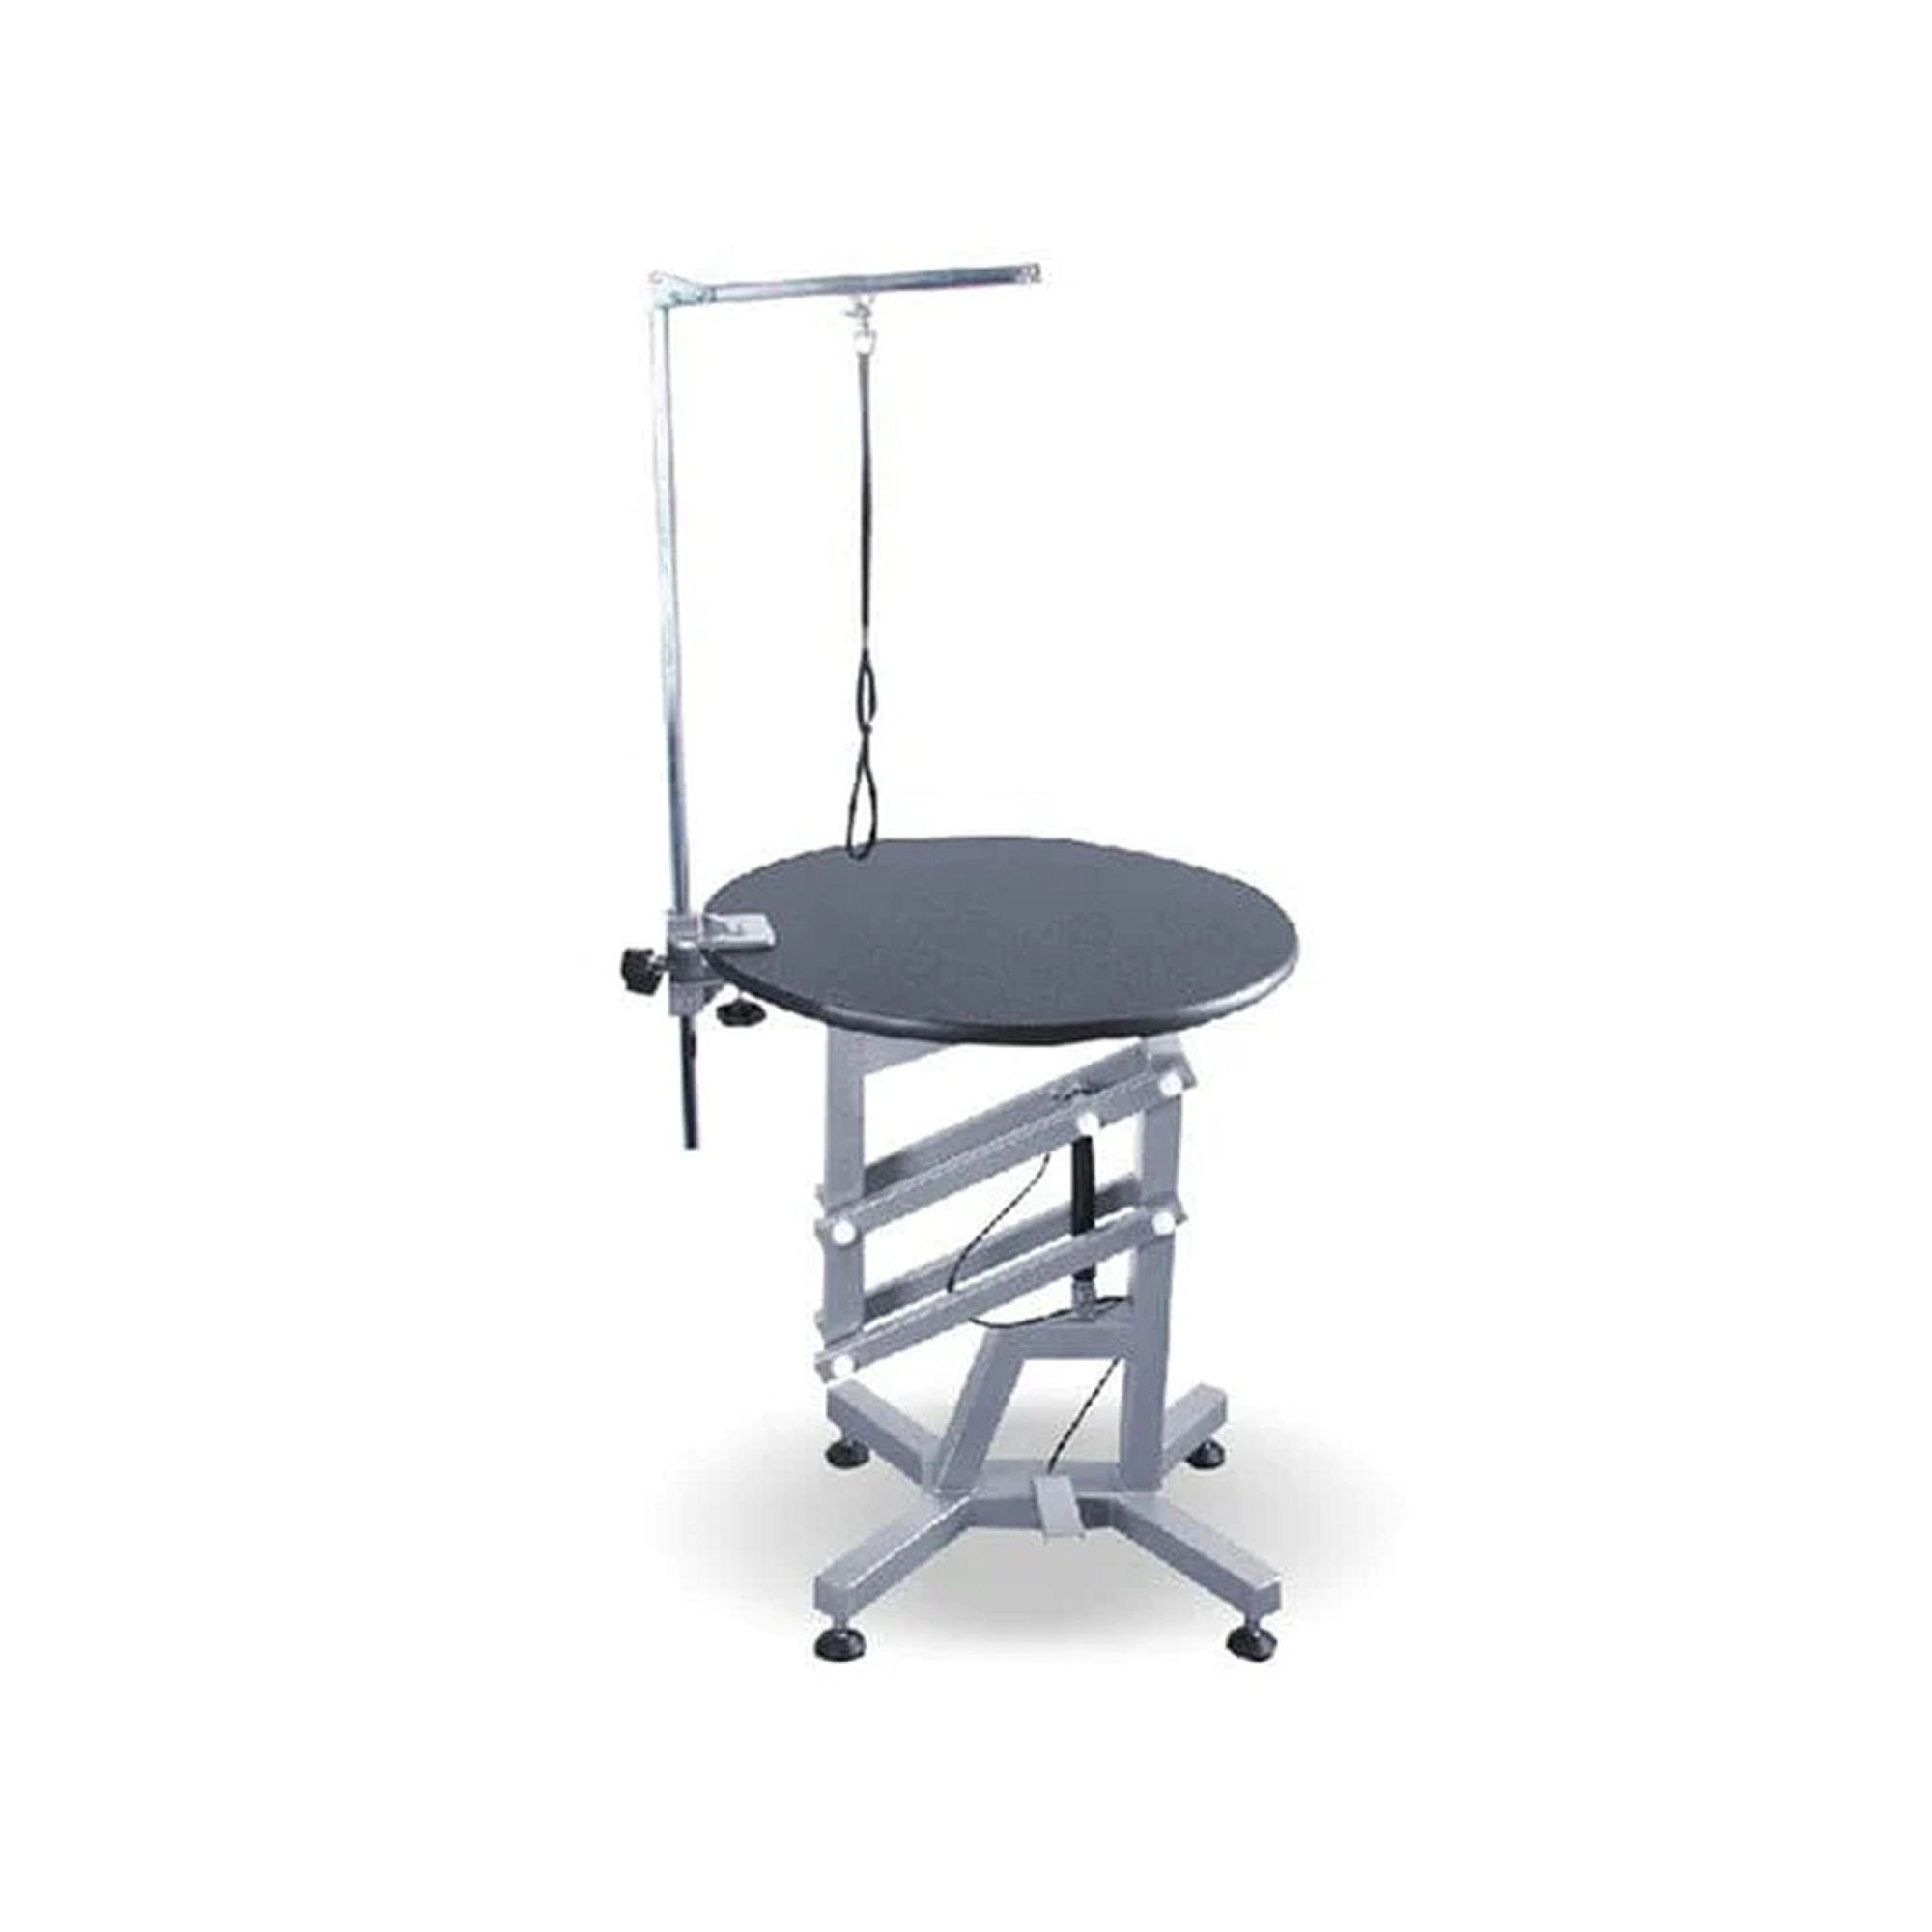 Hydraulic Adjustable Pet Dog Grooming Table with 1 Noose